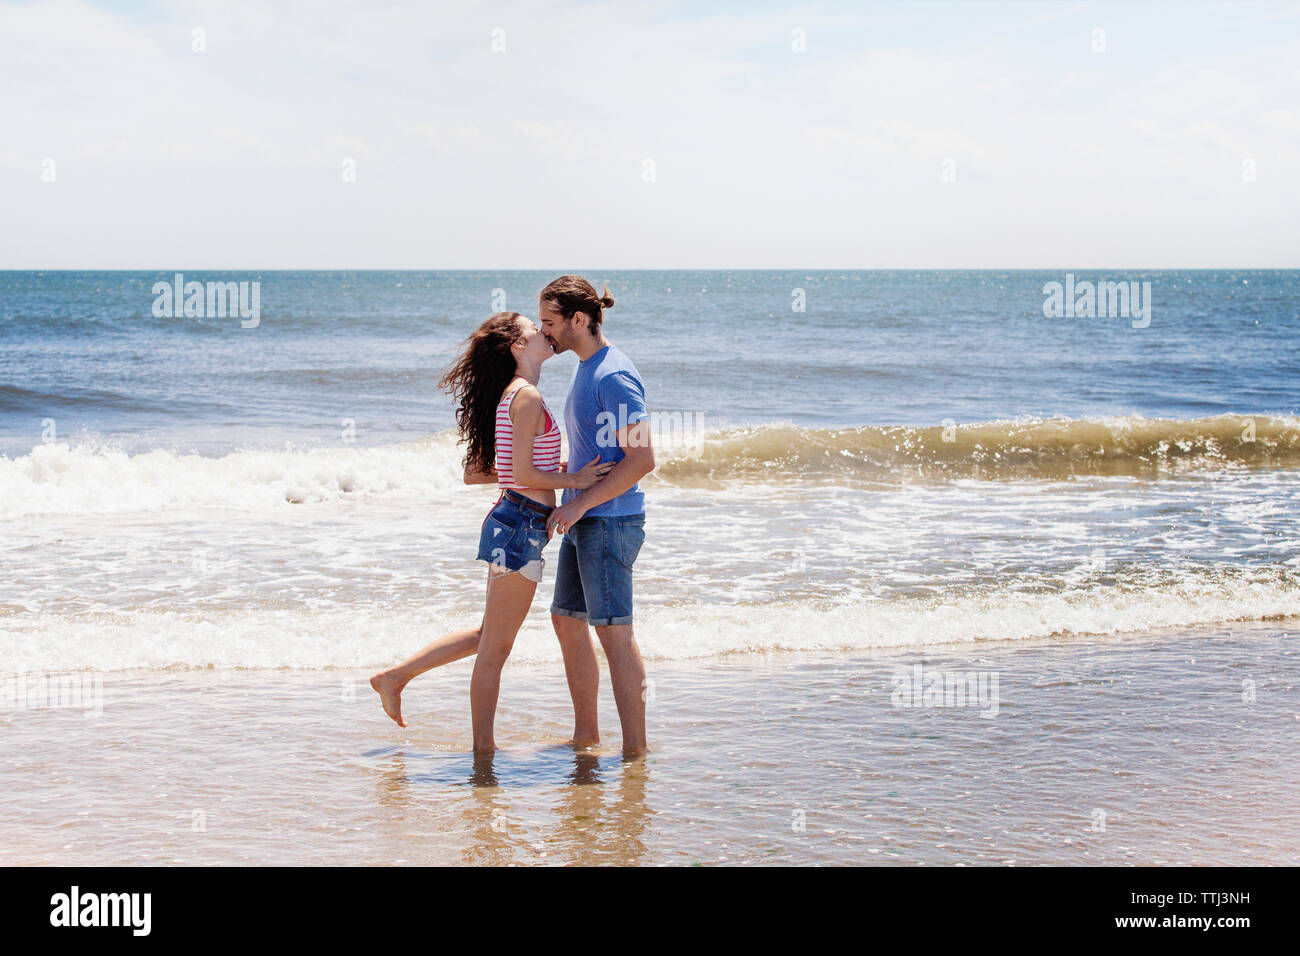 Affectionate couple kissing while standing on shore at beach Stock Photo